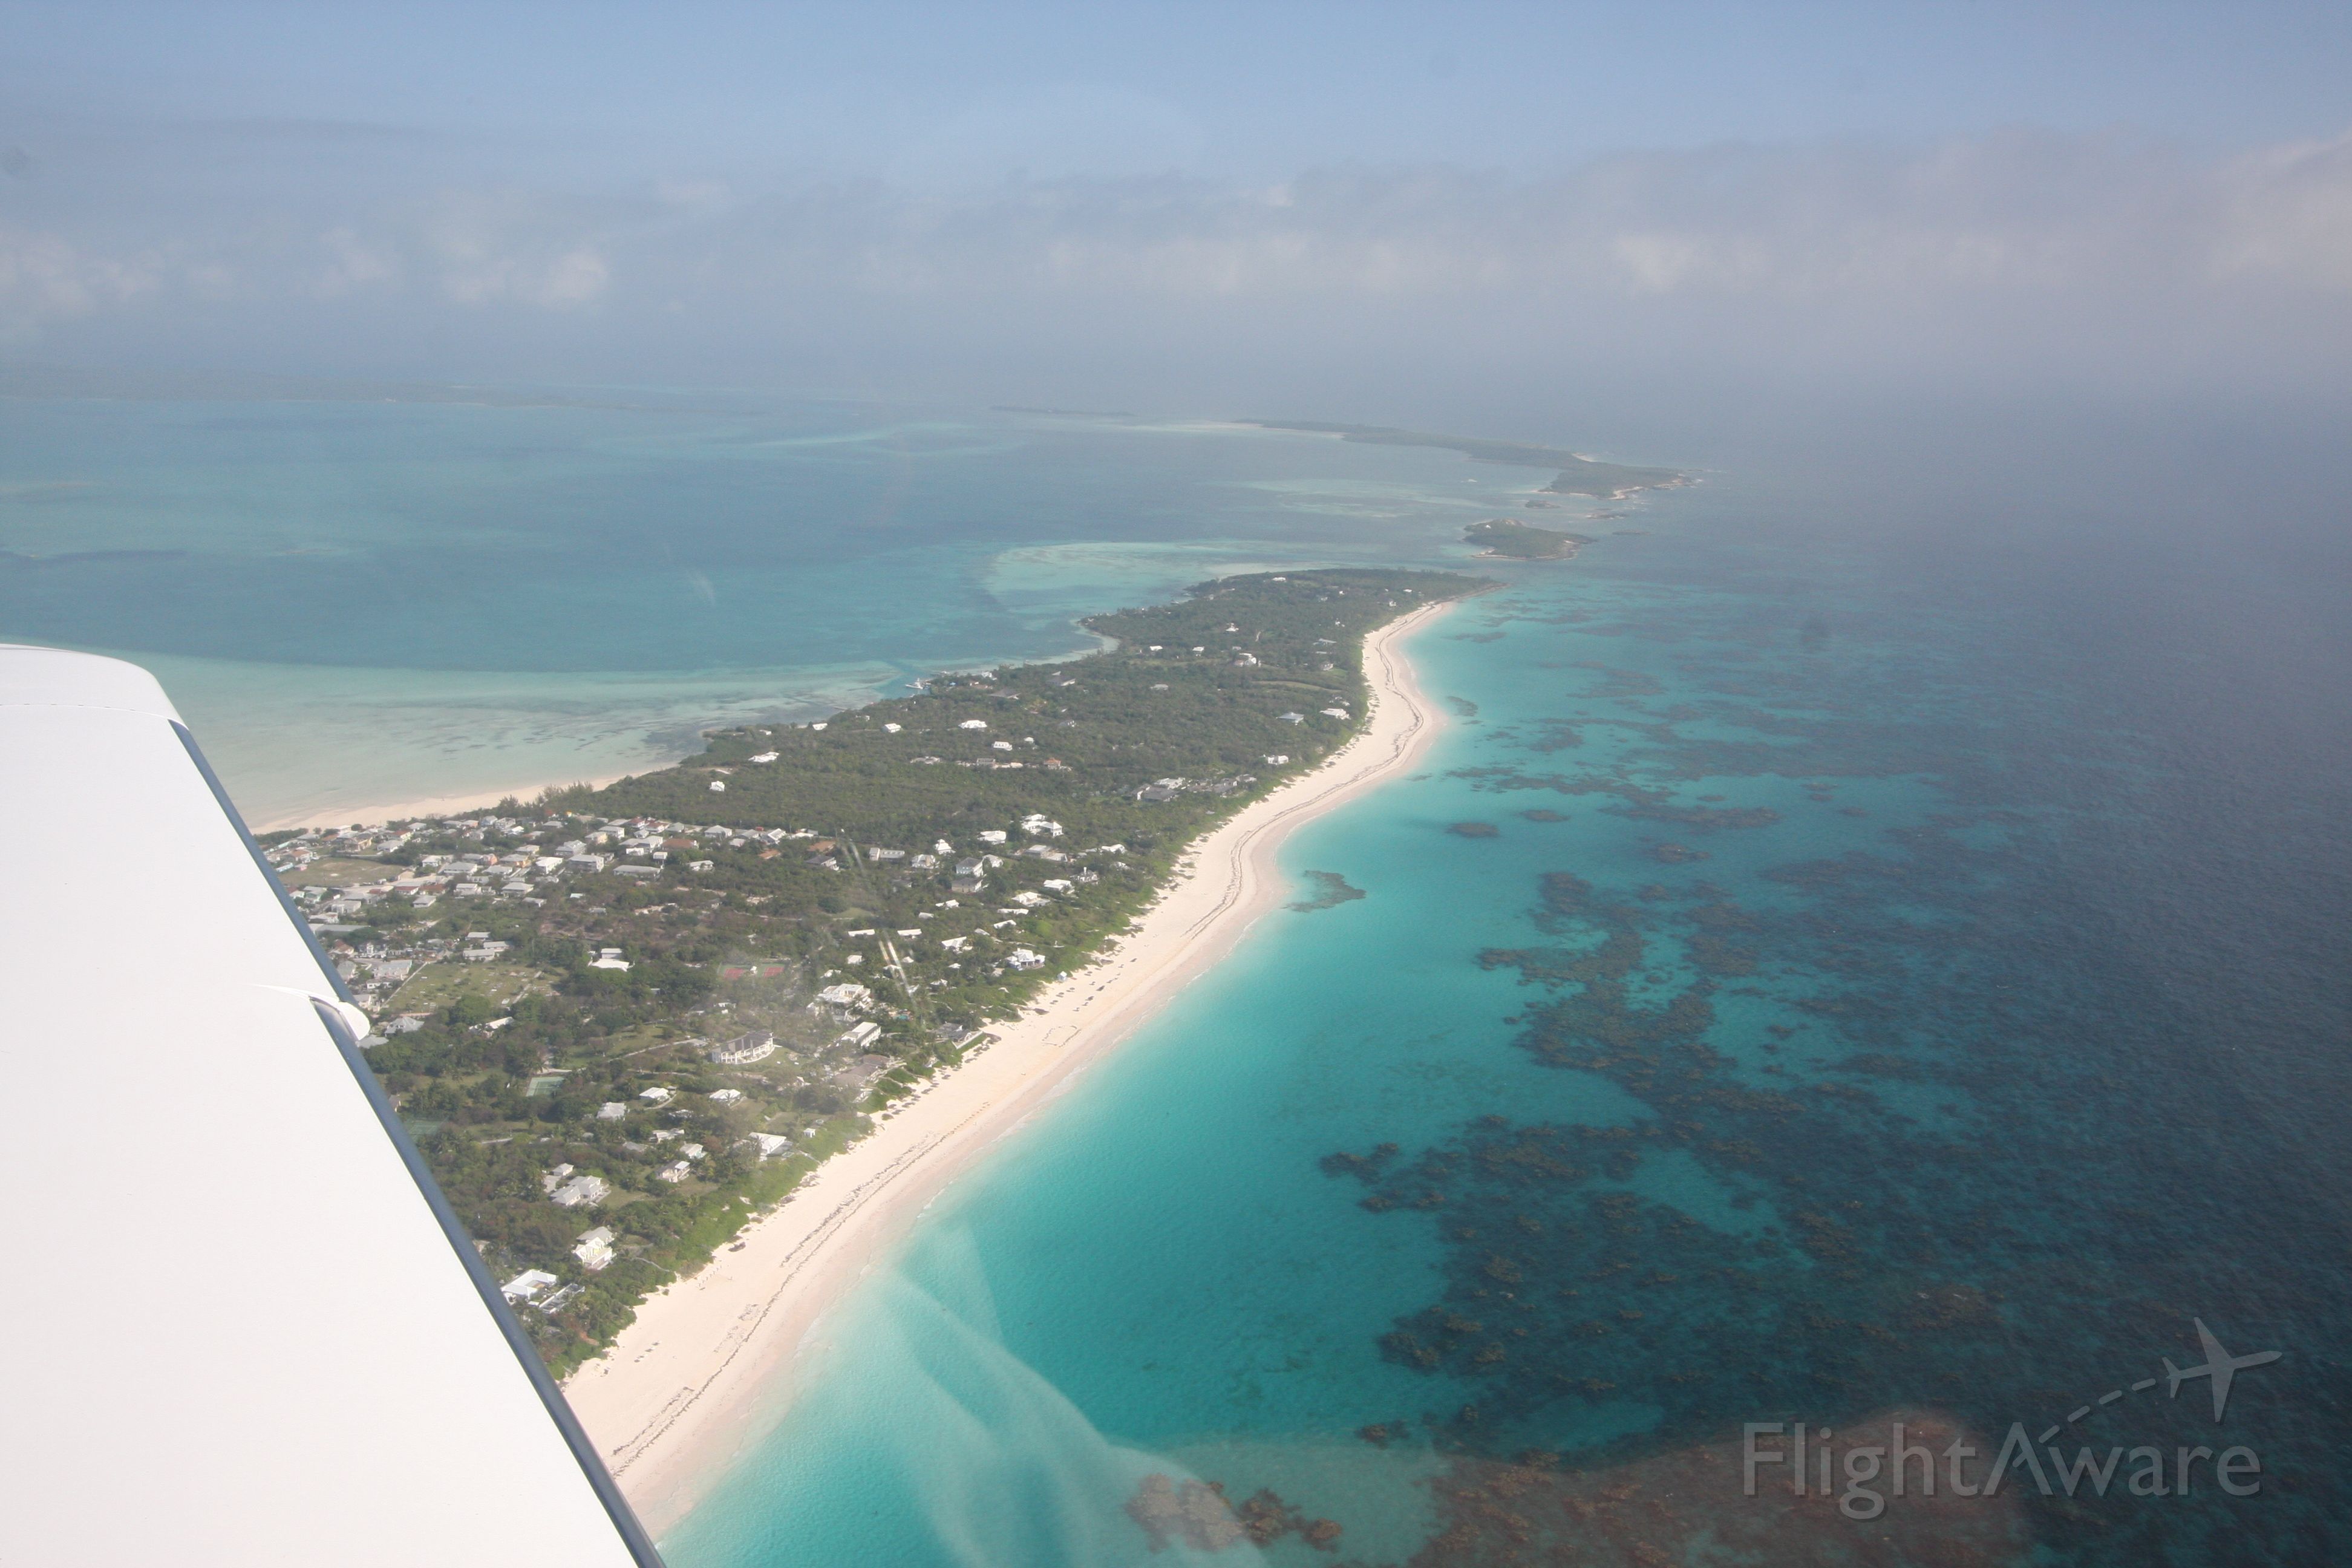 Cirrus SR-22 (N229SG) - The Cirrus departing over Harbour Island Bahamas.  The famous pink sands beach is on the right.